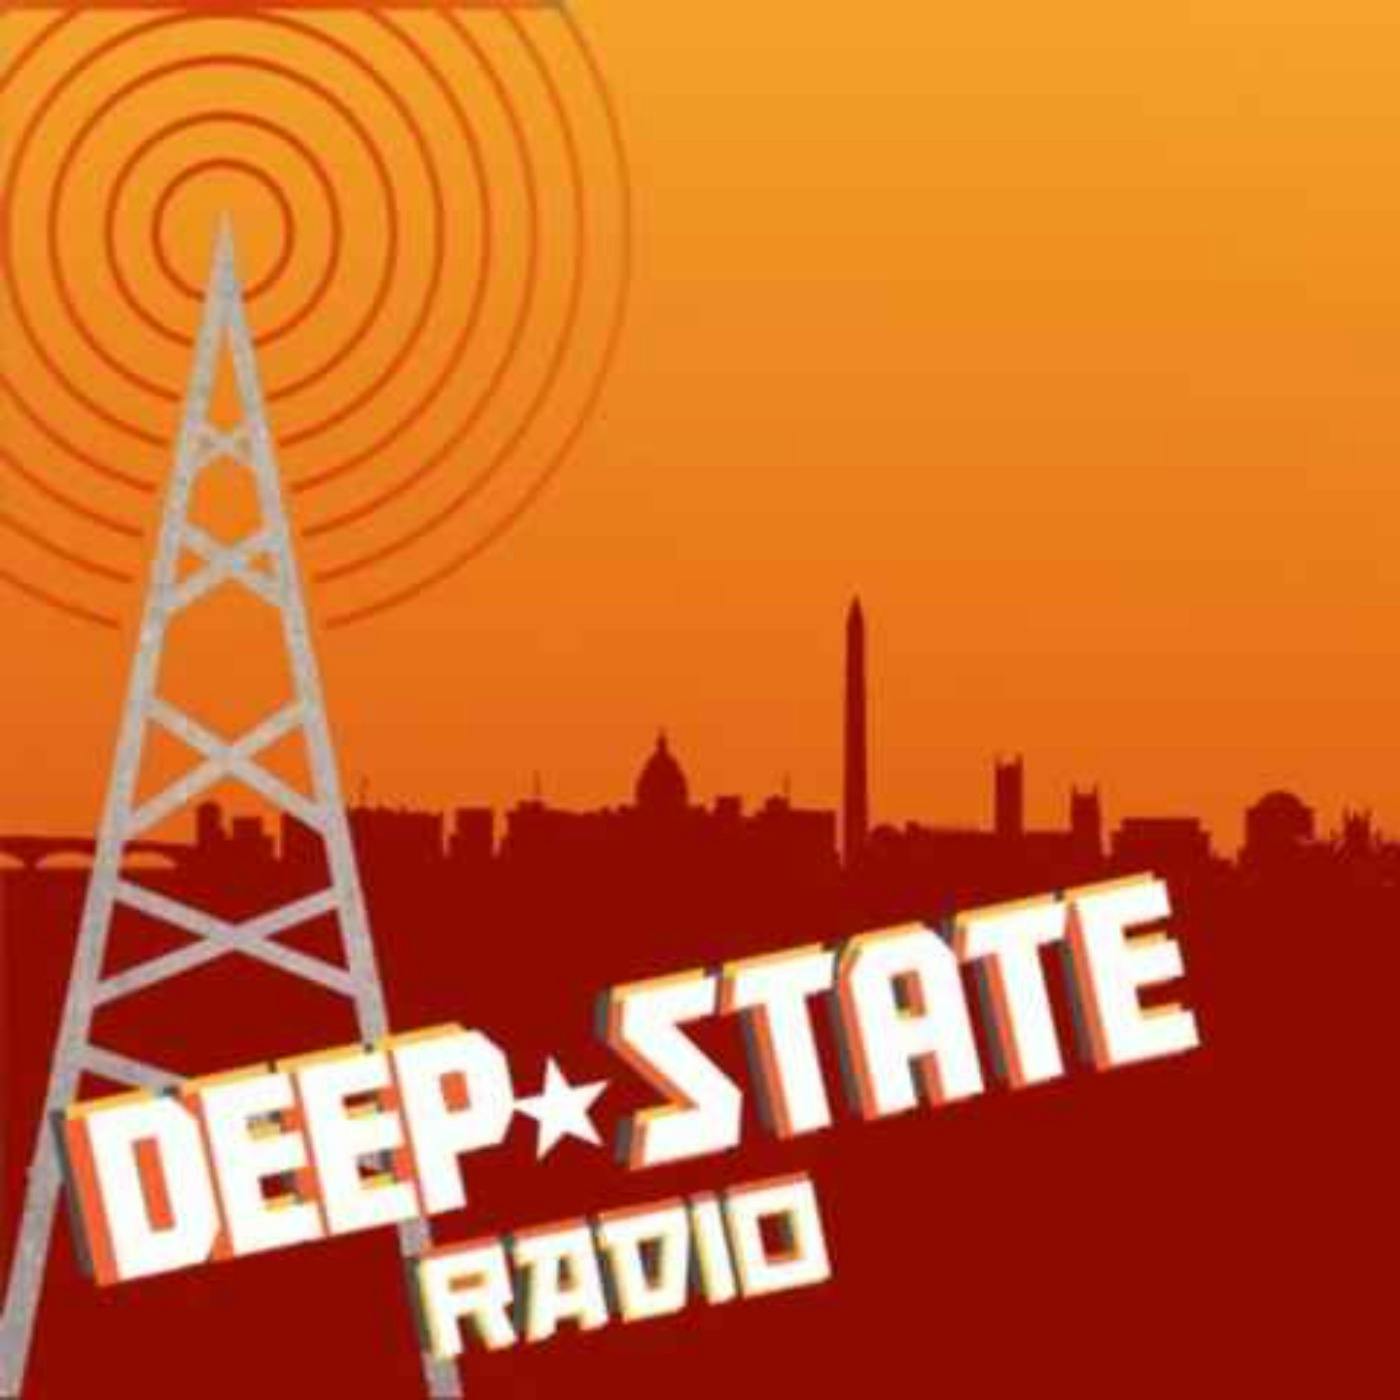 Deep State Radio: One-on-one with Gayle Tzemach Lemmon: Why It is So Important to Tell the Stories of Heroic Women